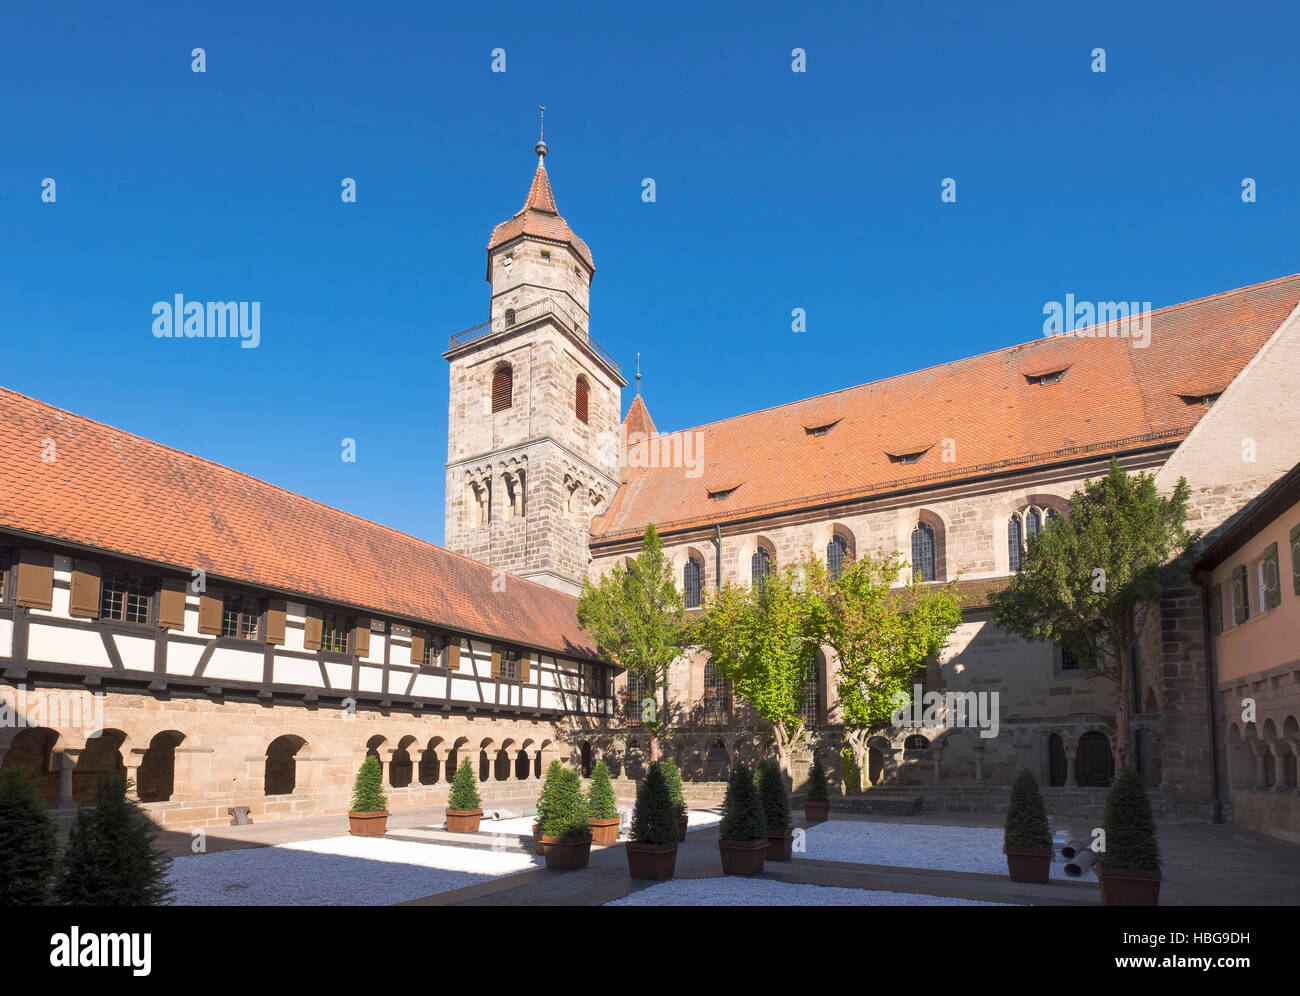 Romanesque cloister and Evangelical Church, Feuchtwangen, Middle Franconia, Franconia, Bavaria, Germany Stock Photo